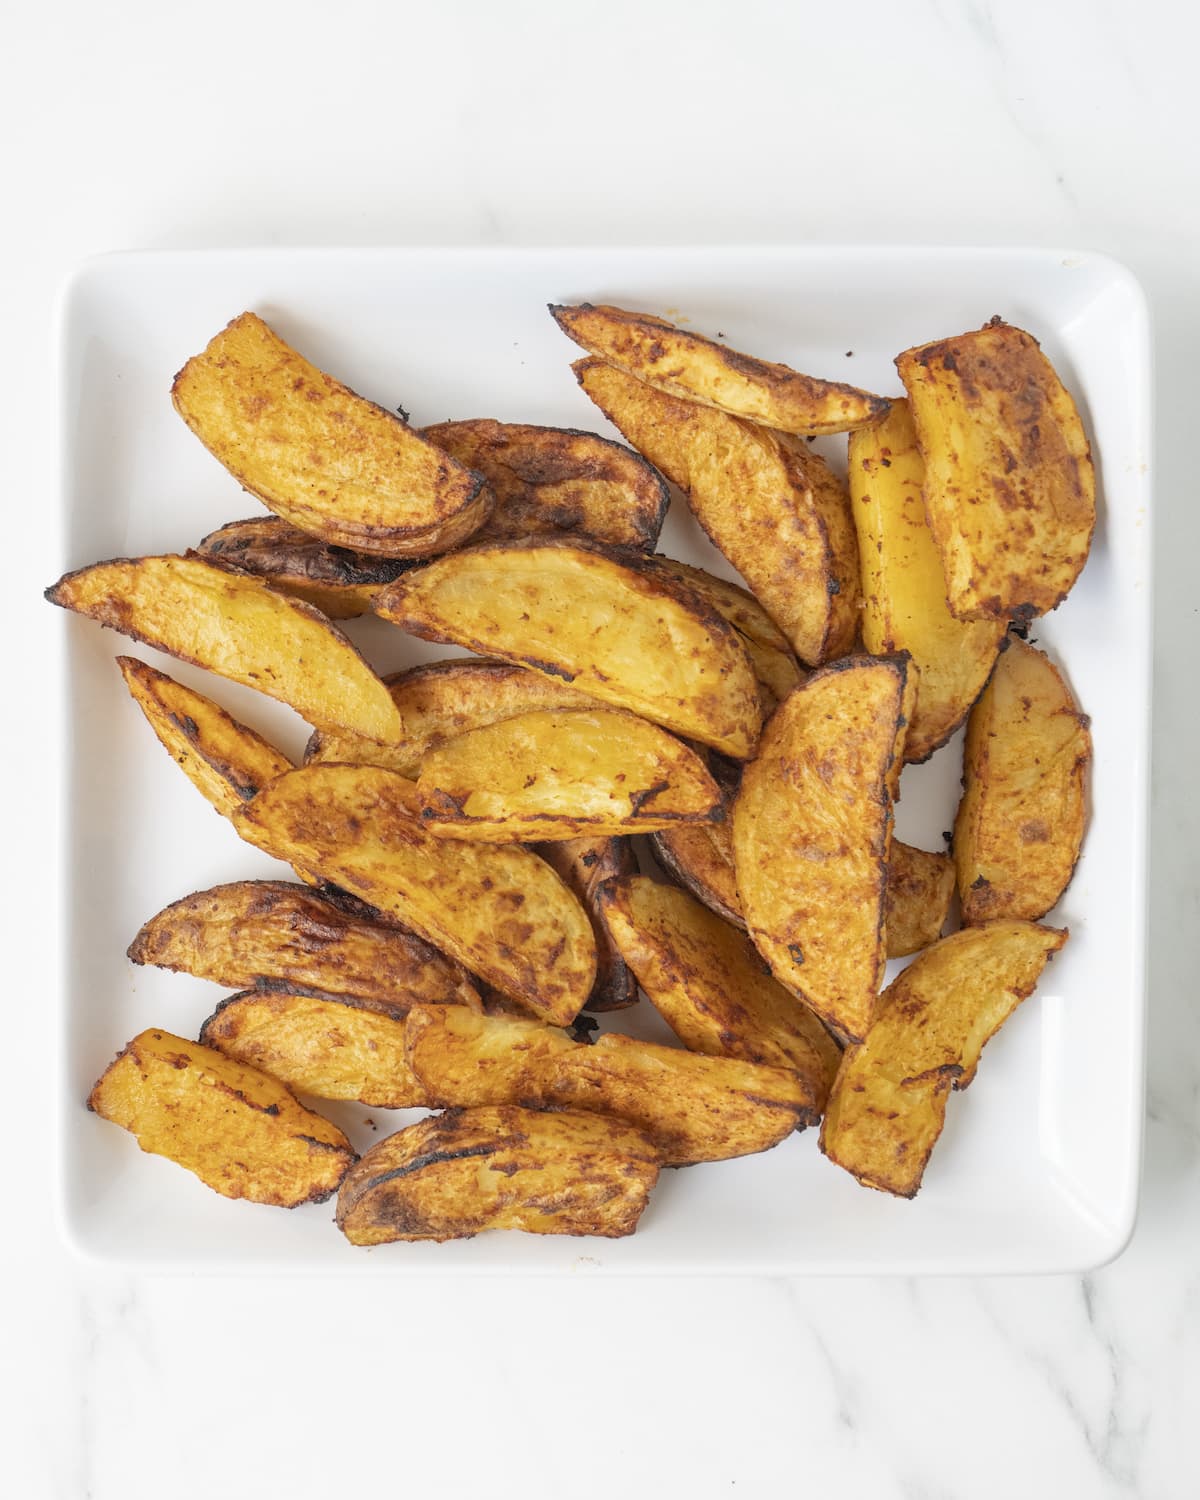 Cooked potato wedges on a white oven-safe ceramic plate on a white countertop.